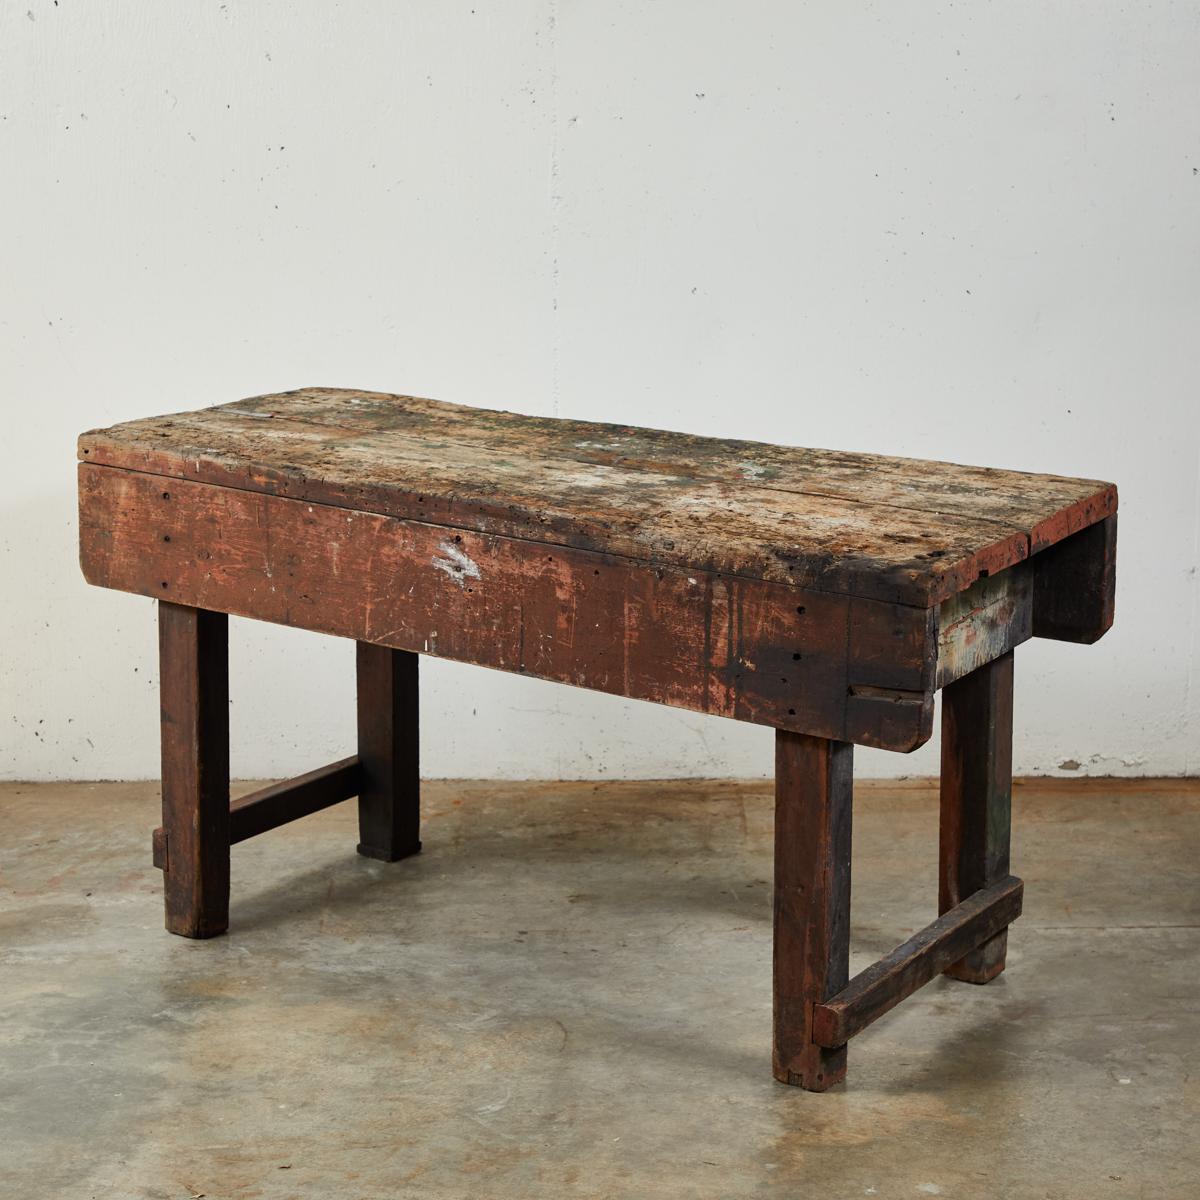 Late 19th century rustic industrial work table from France.